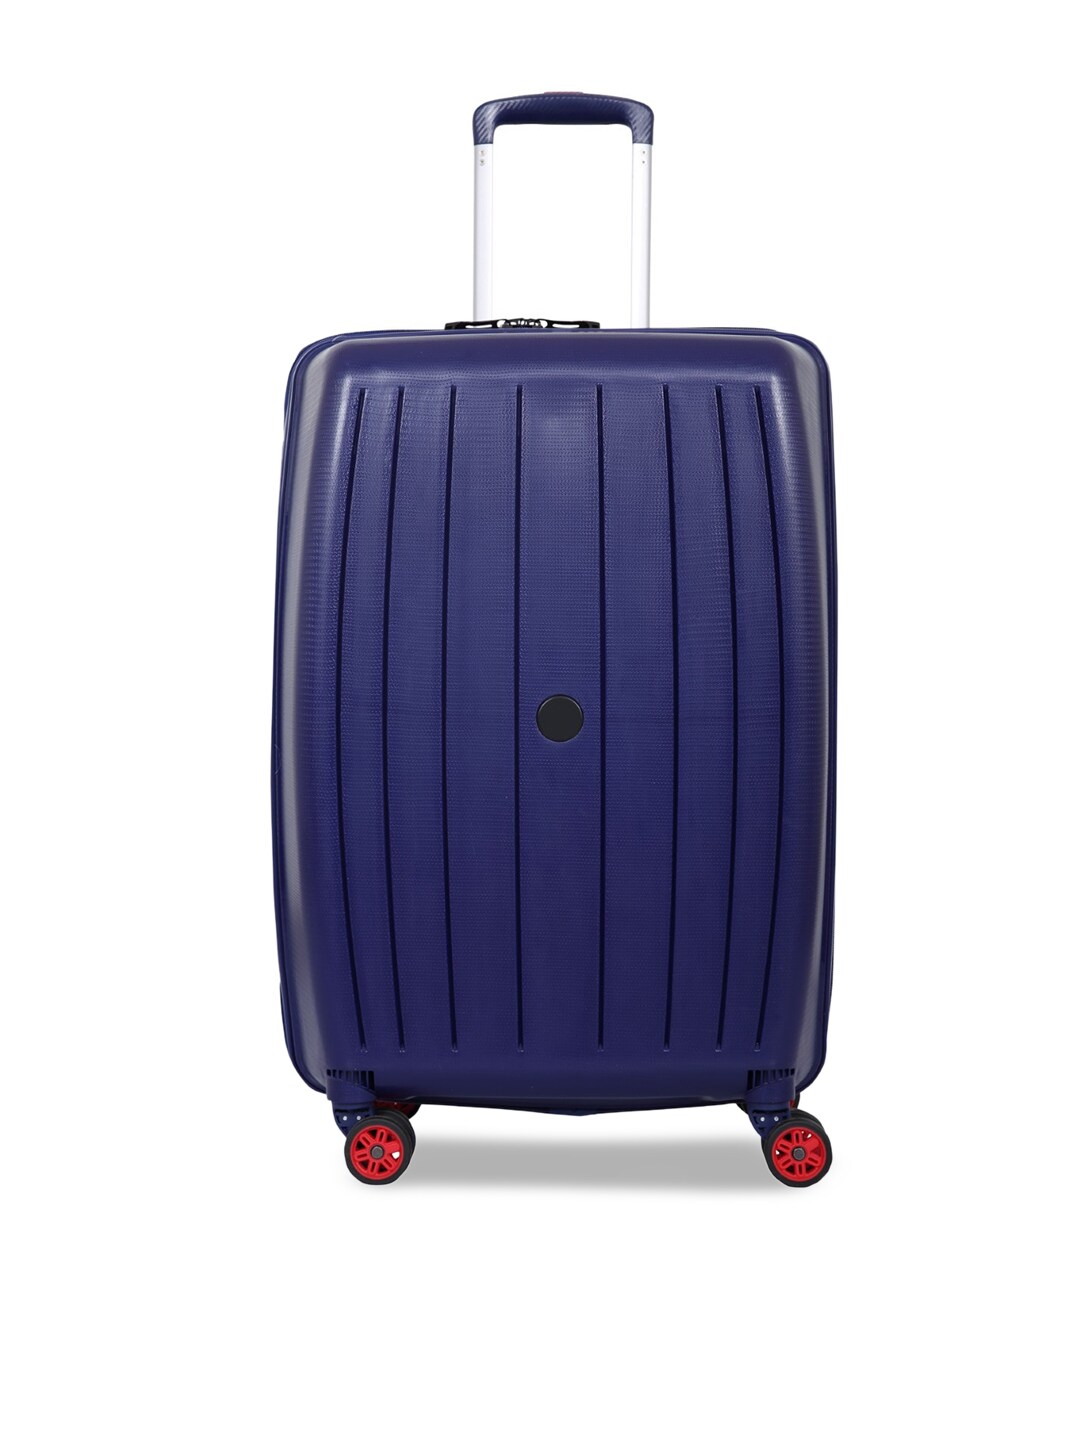 Polo Class Purple Scan Trolley Bag Price in India